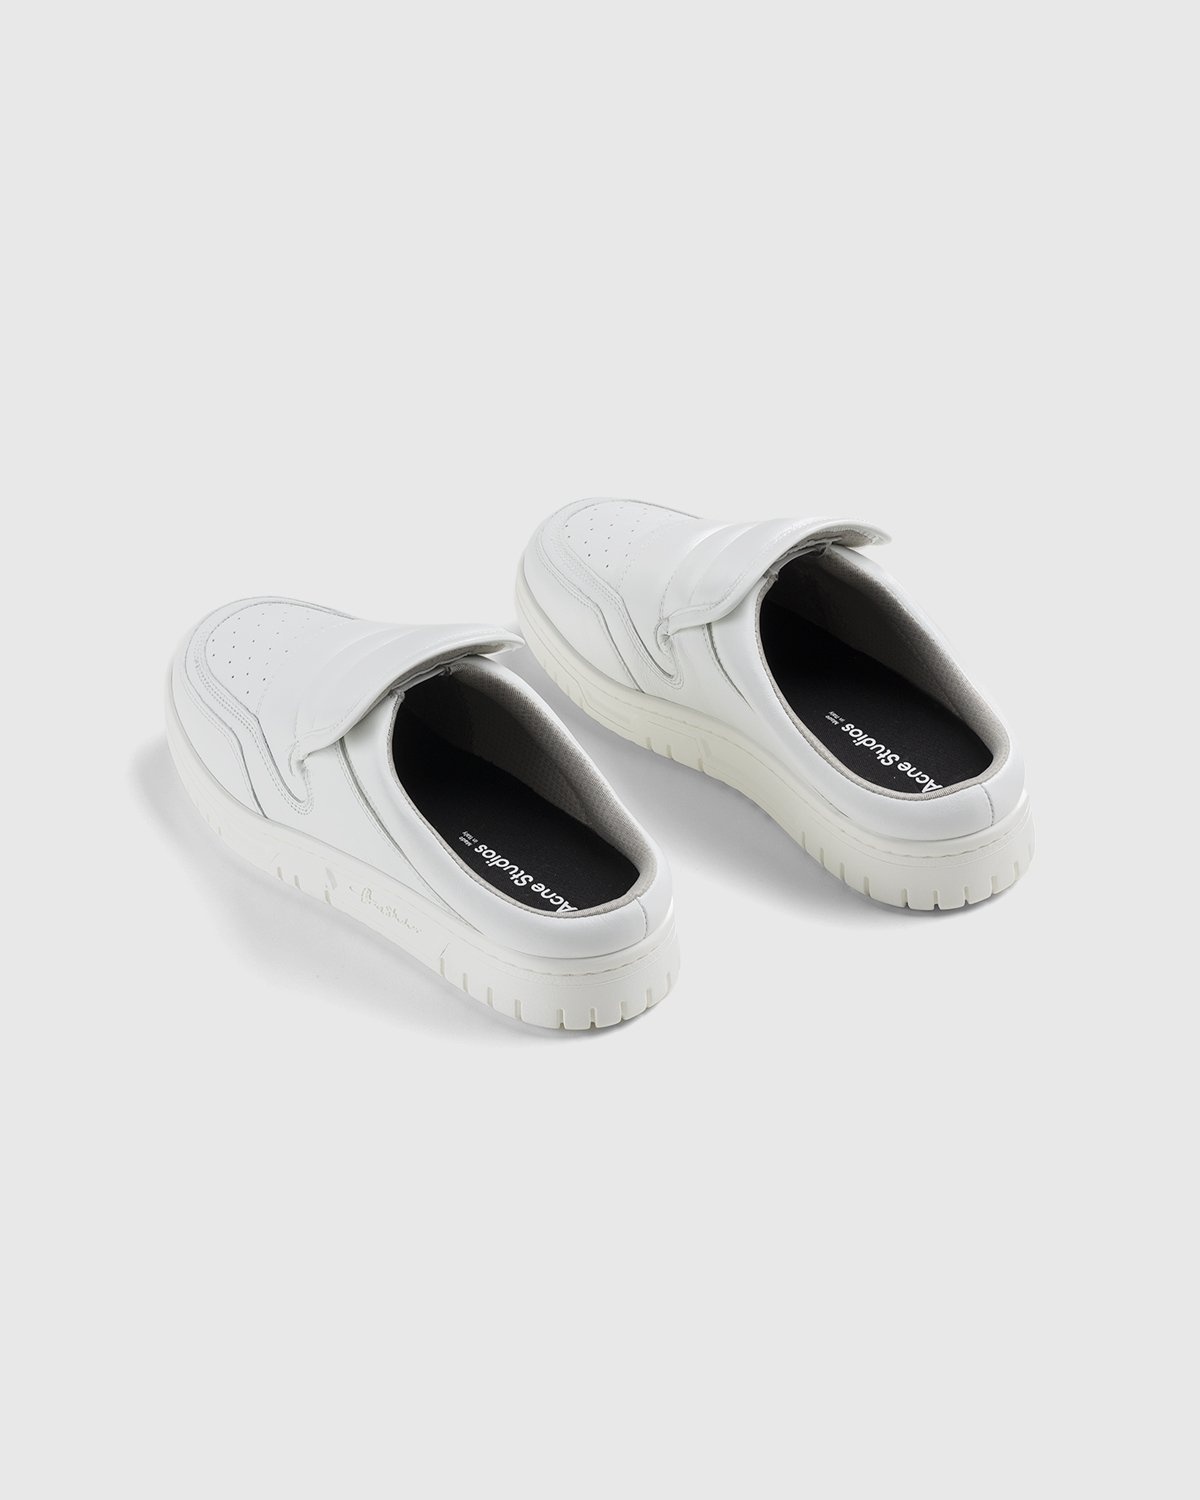 Acne Studios – Cow Leather Mule White - Mules - White - Image 4